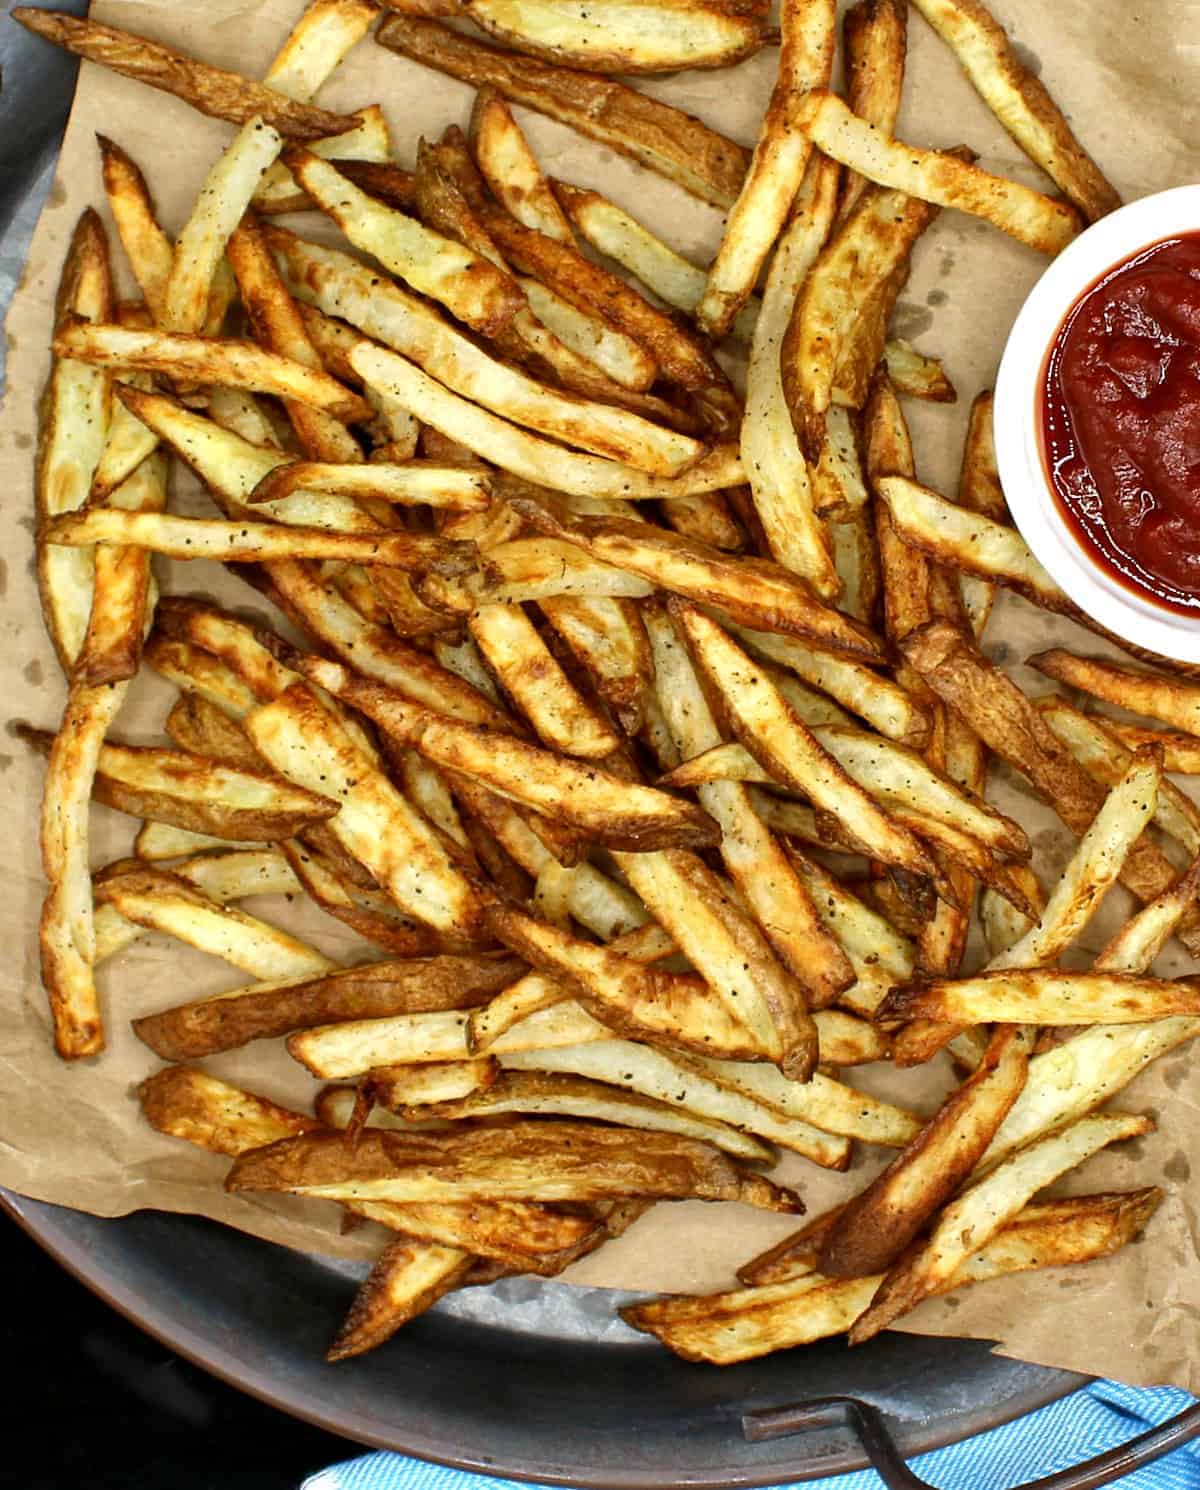 A closeup top photo of air fryer French fries, golden and crispy, on brown paper. These are made with very little oil or no oil. Next to the fries is a white ceramic bowl with tomato ketchup.